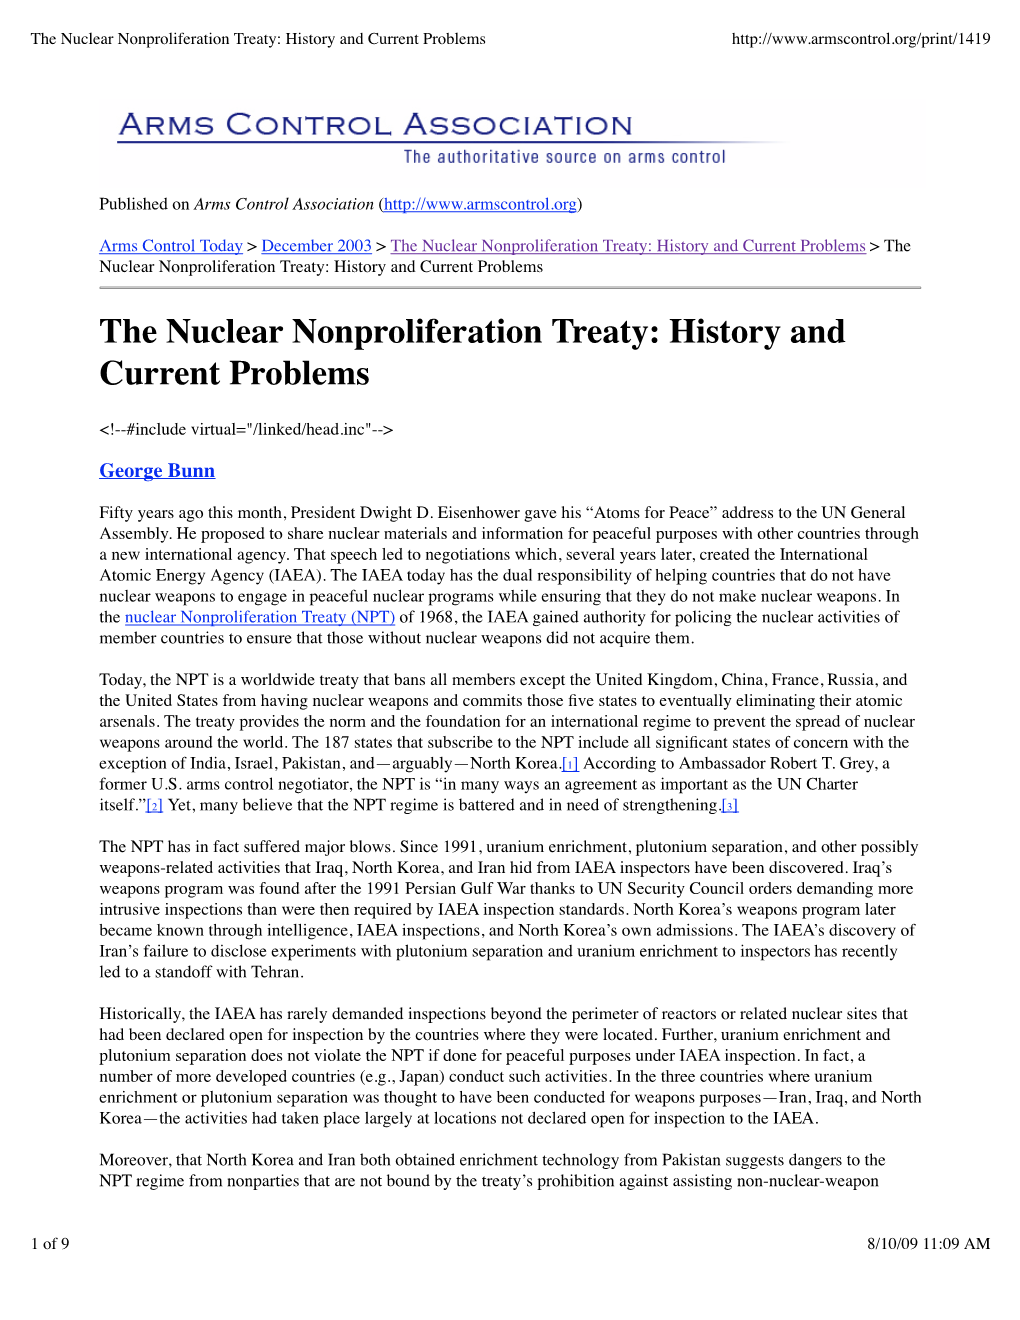 The Nuclear Nonproliferation Treaty History and Current Problems